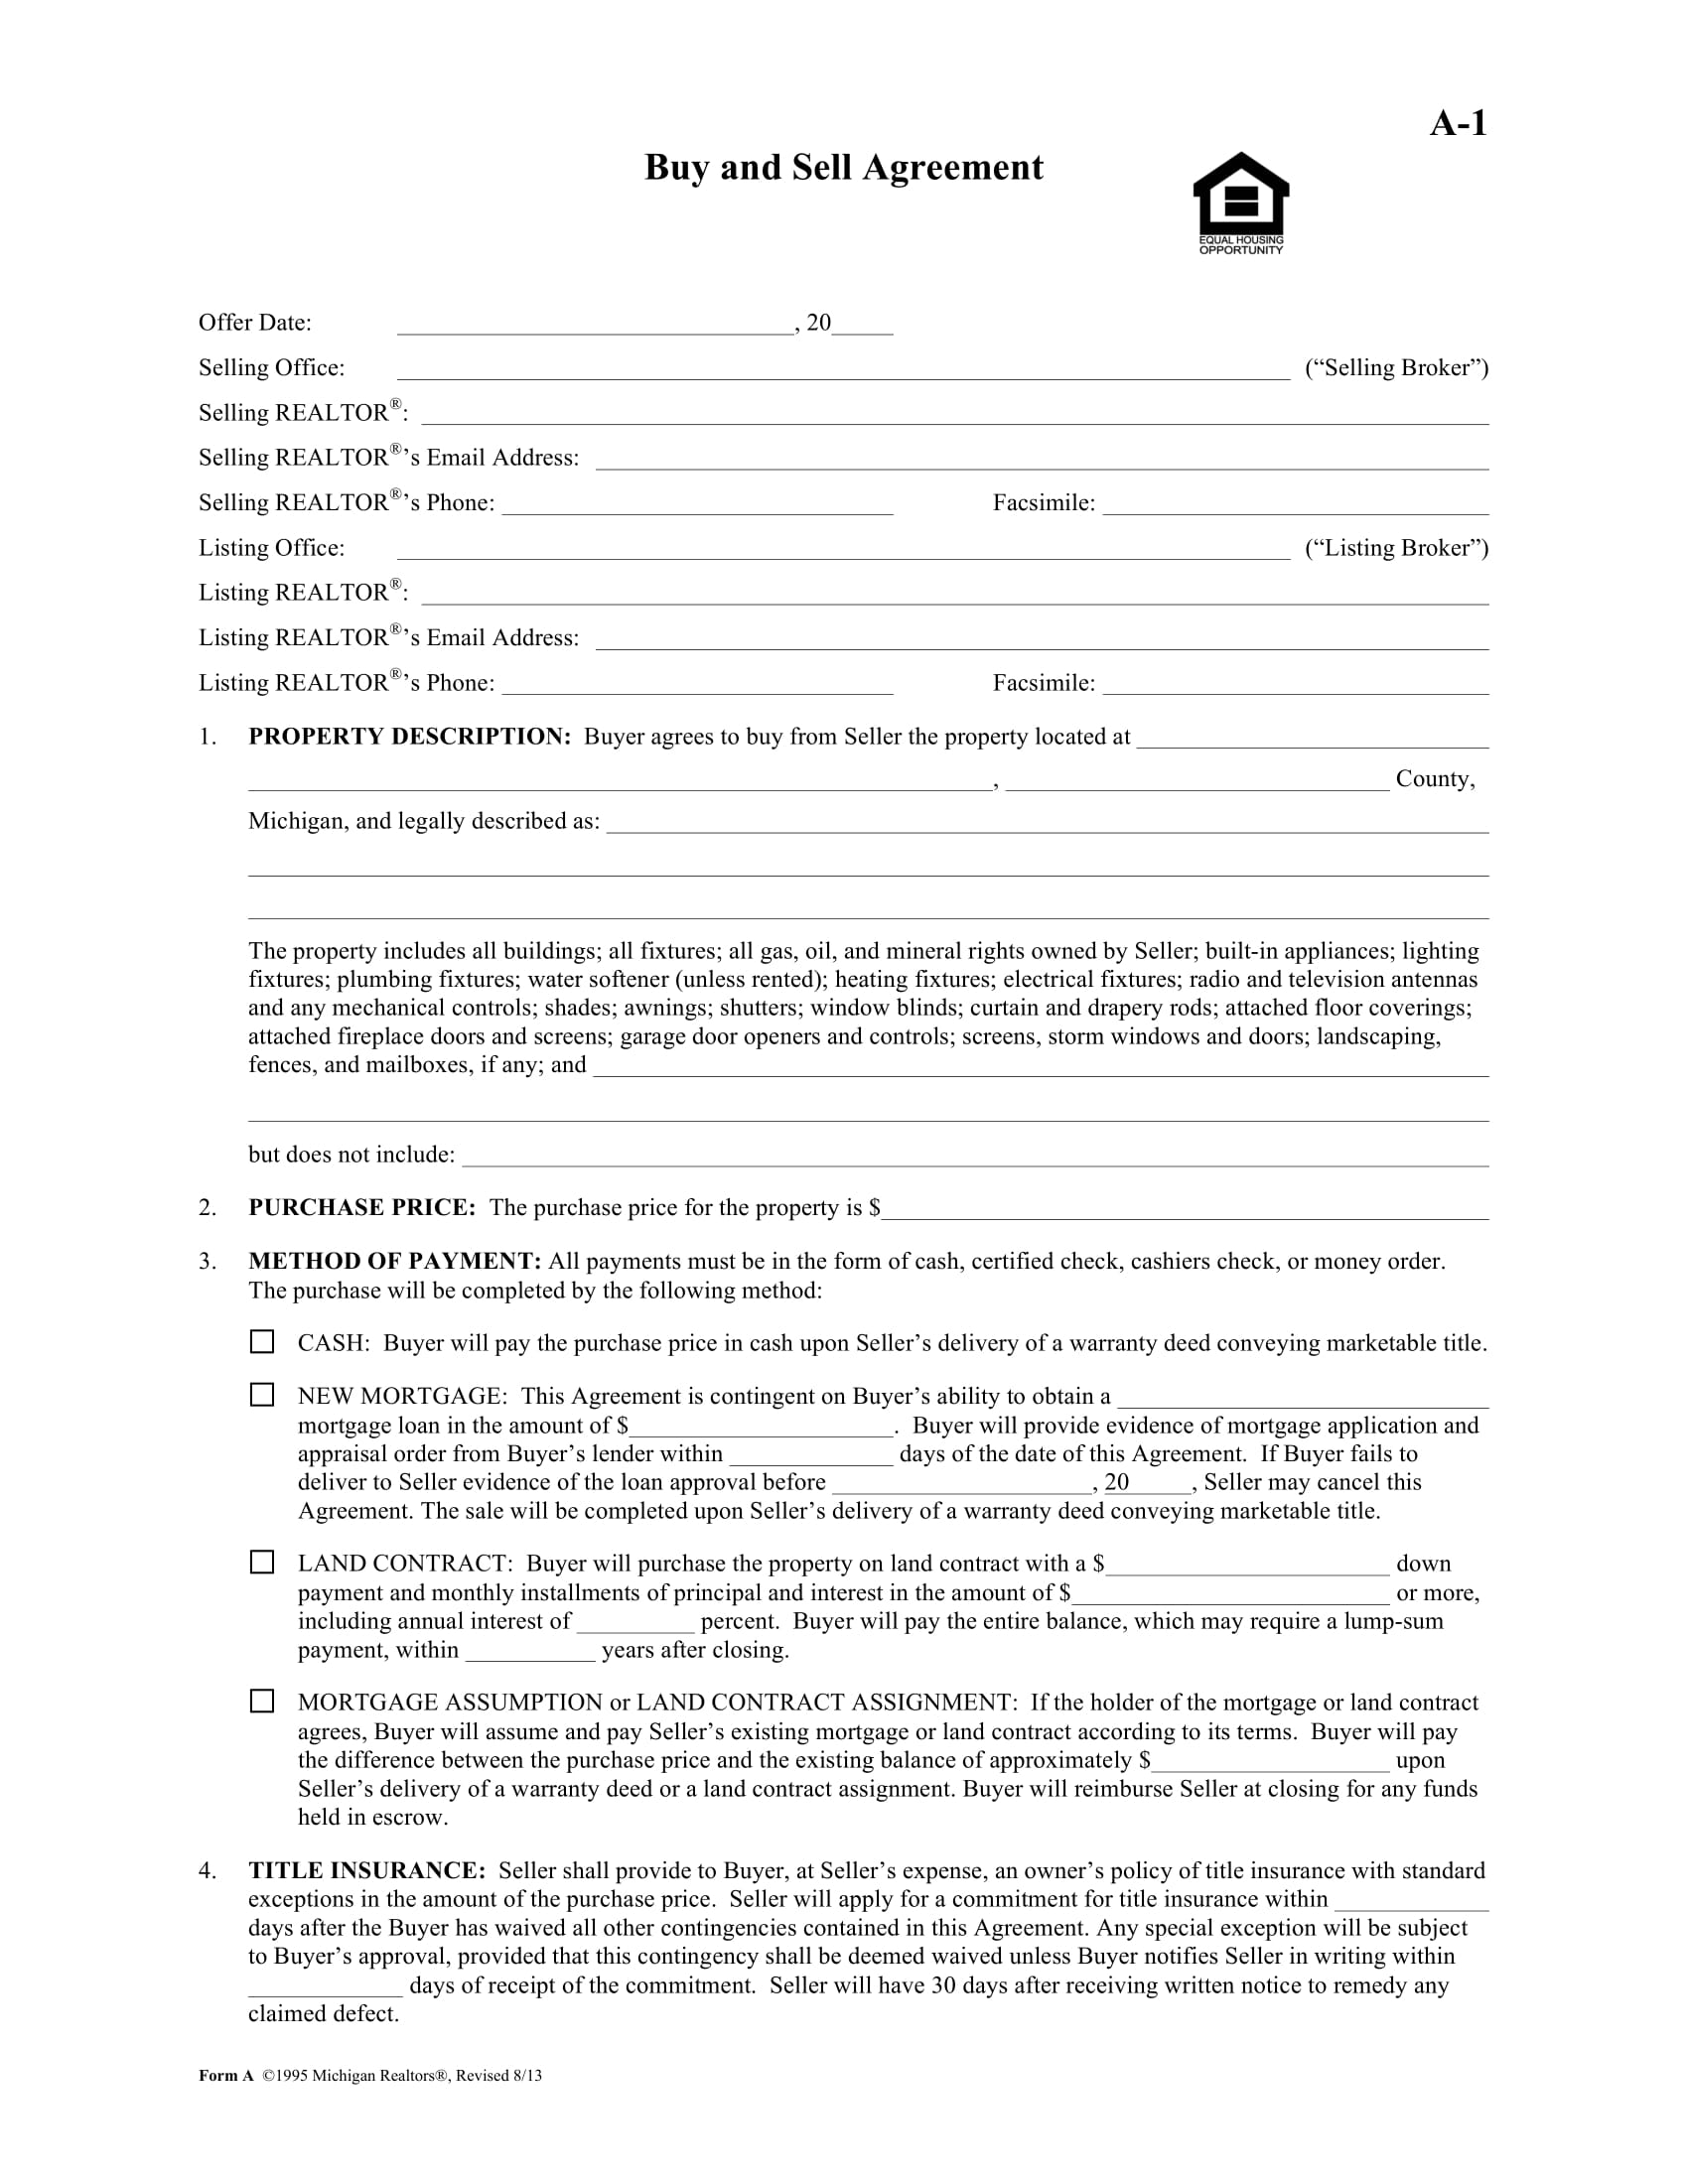 buy and sell agreement contract sample 1